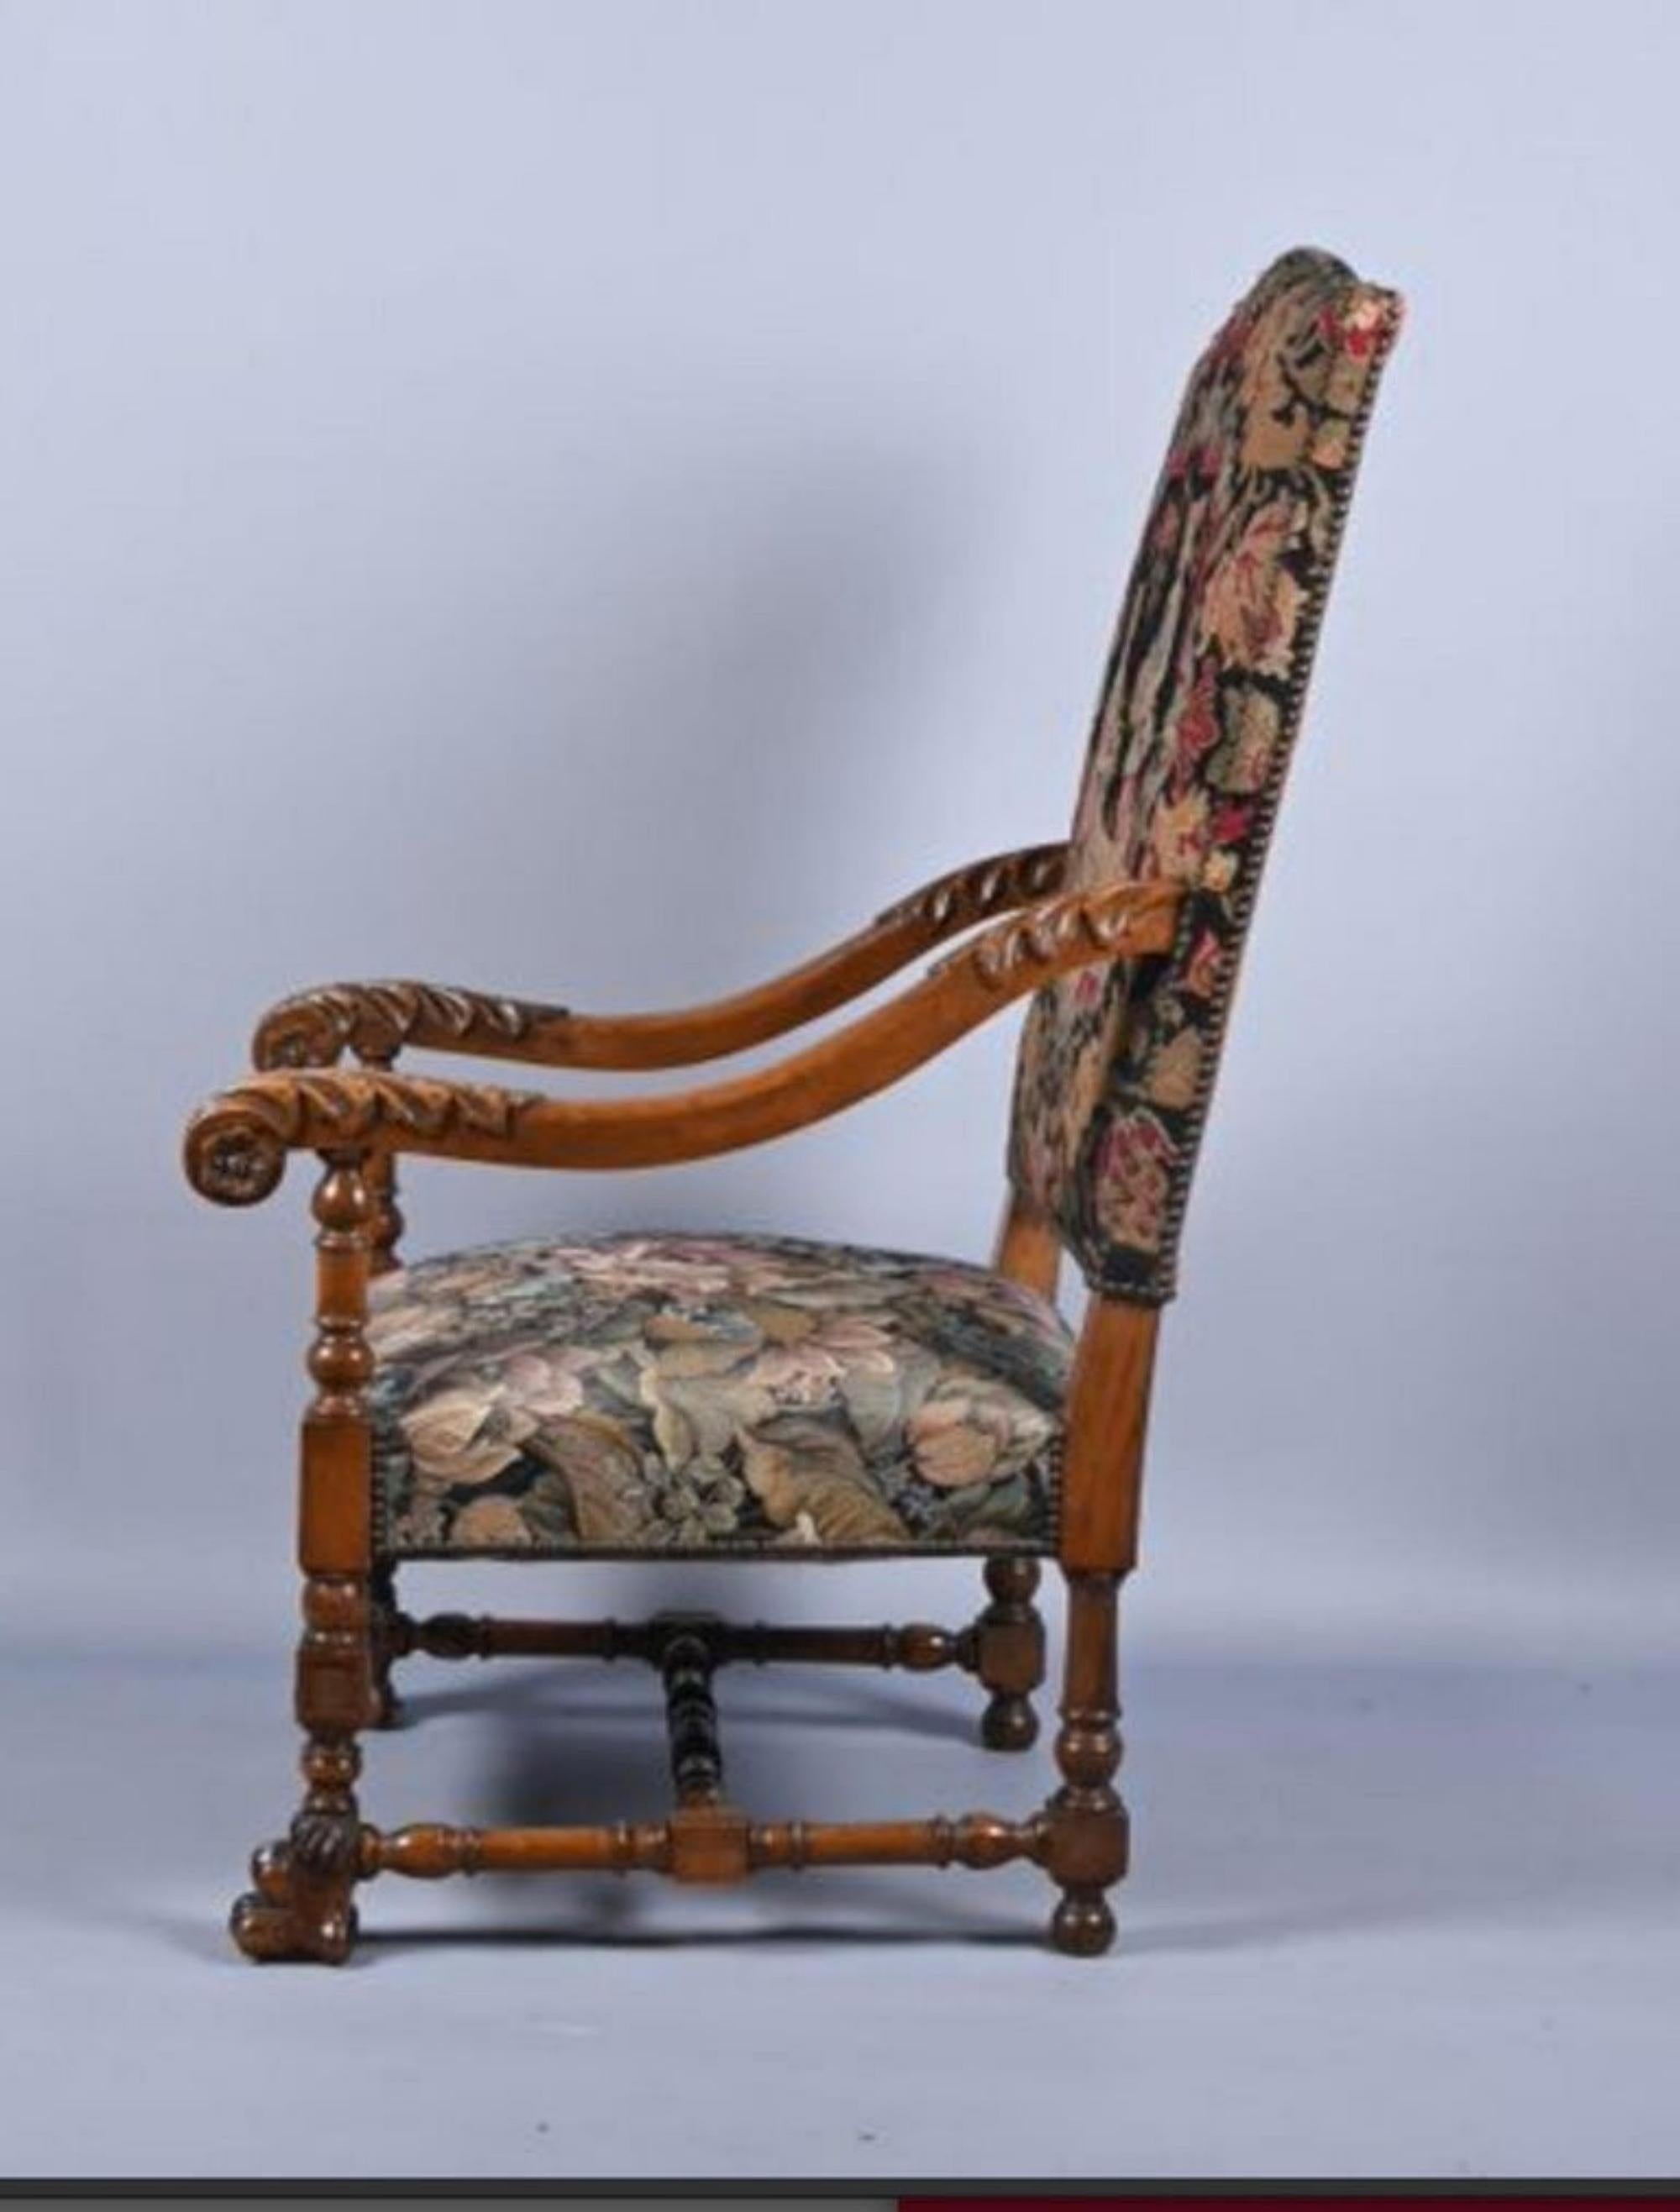 Rare 18th Century Portuguese Chair in Walnut
High-backed armchair à la reine in walnut, molded and carved with acanthus leaves, leafy shells and foliage, front claw feet joined by an H-shaped brace. Tapestry and needlepoint.
H. 120.5 cm.
very good